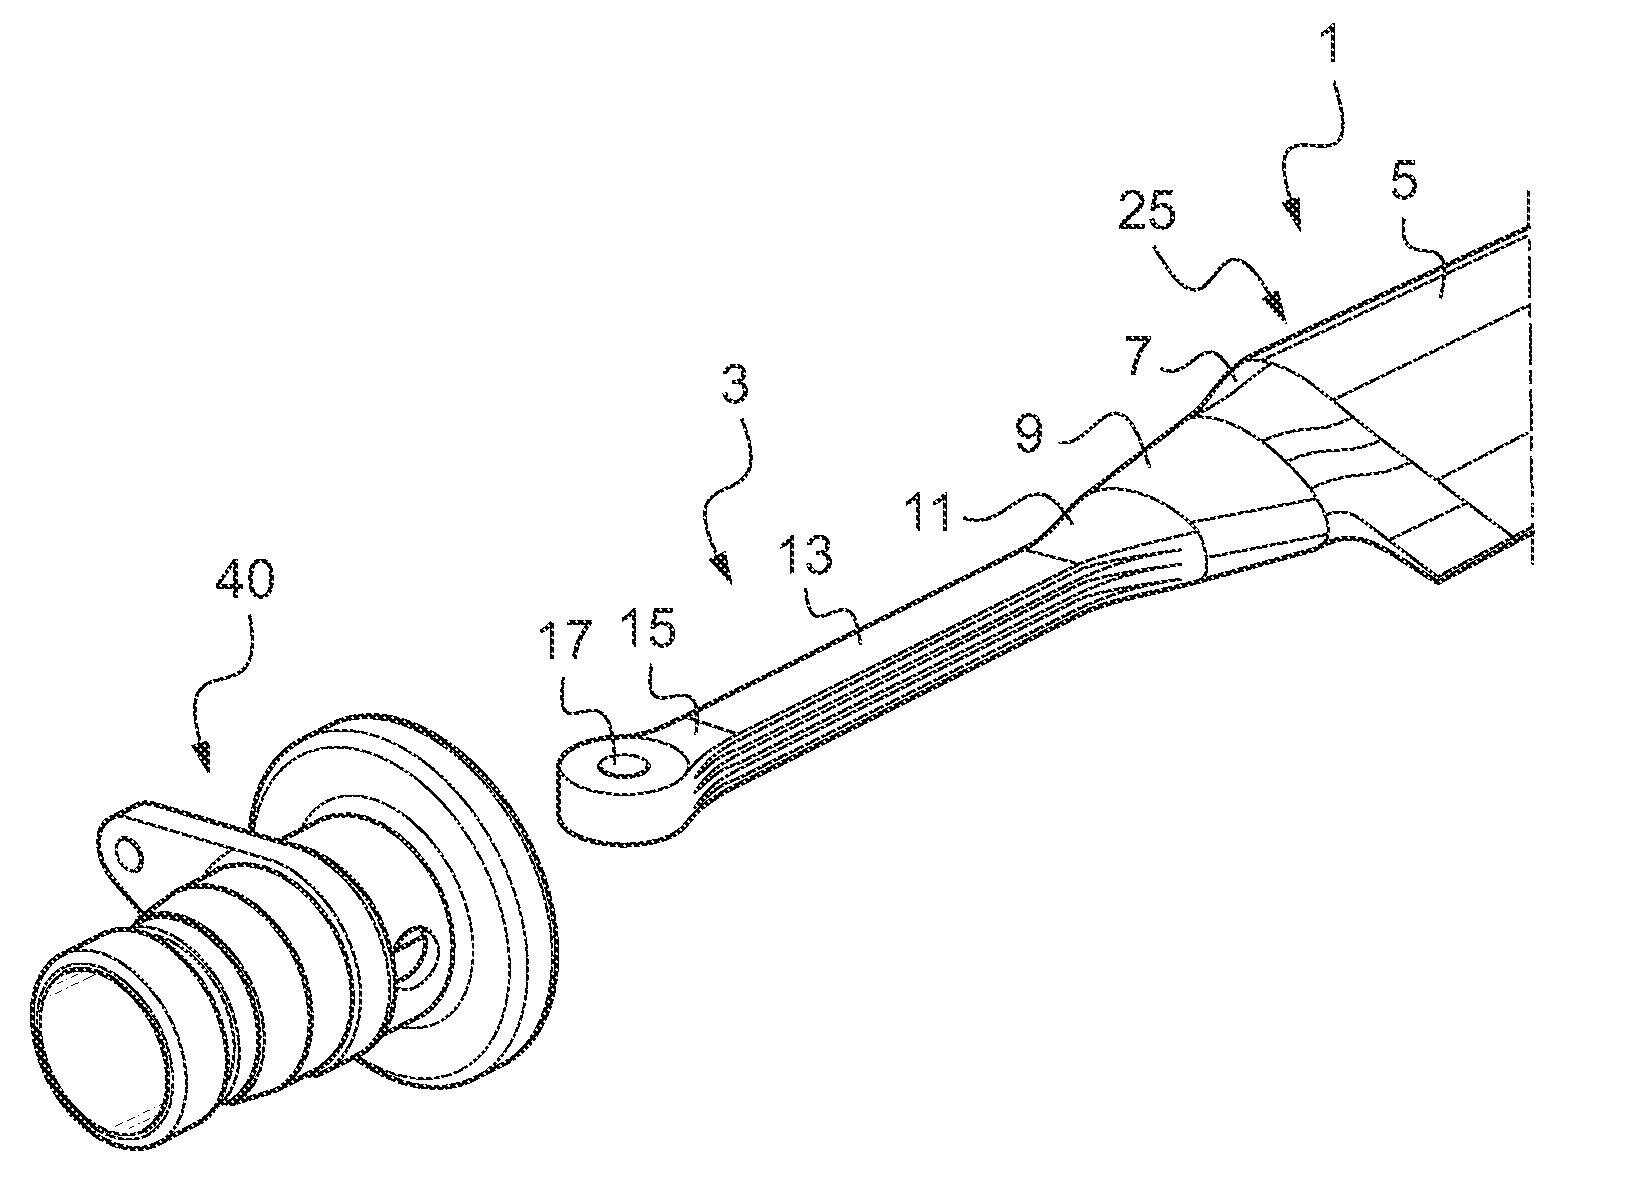 Rotor blade with control tube